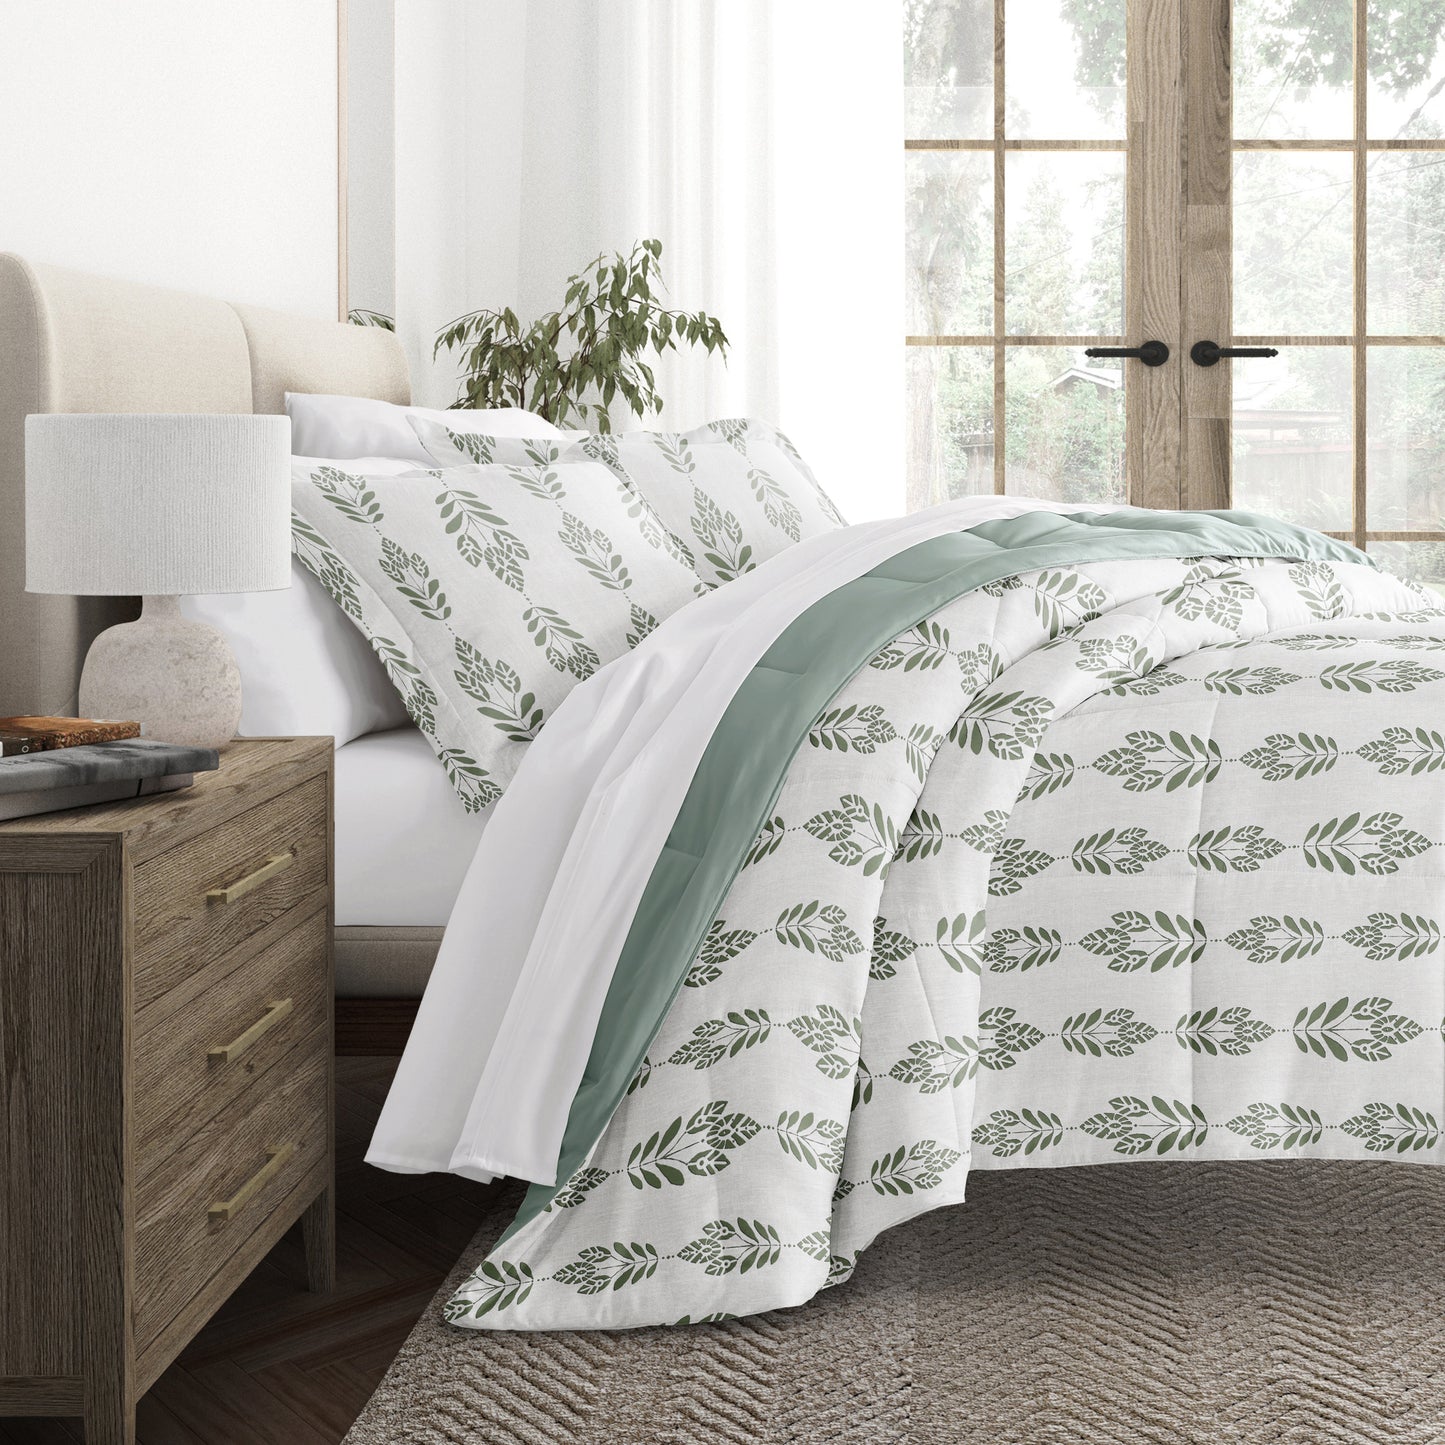 Comforter Sets Reversible Patterns to Solid Color